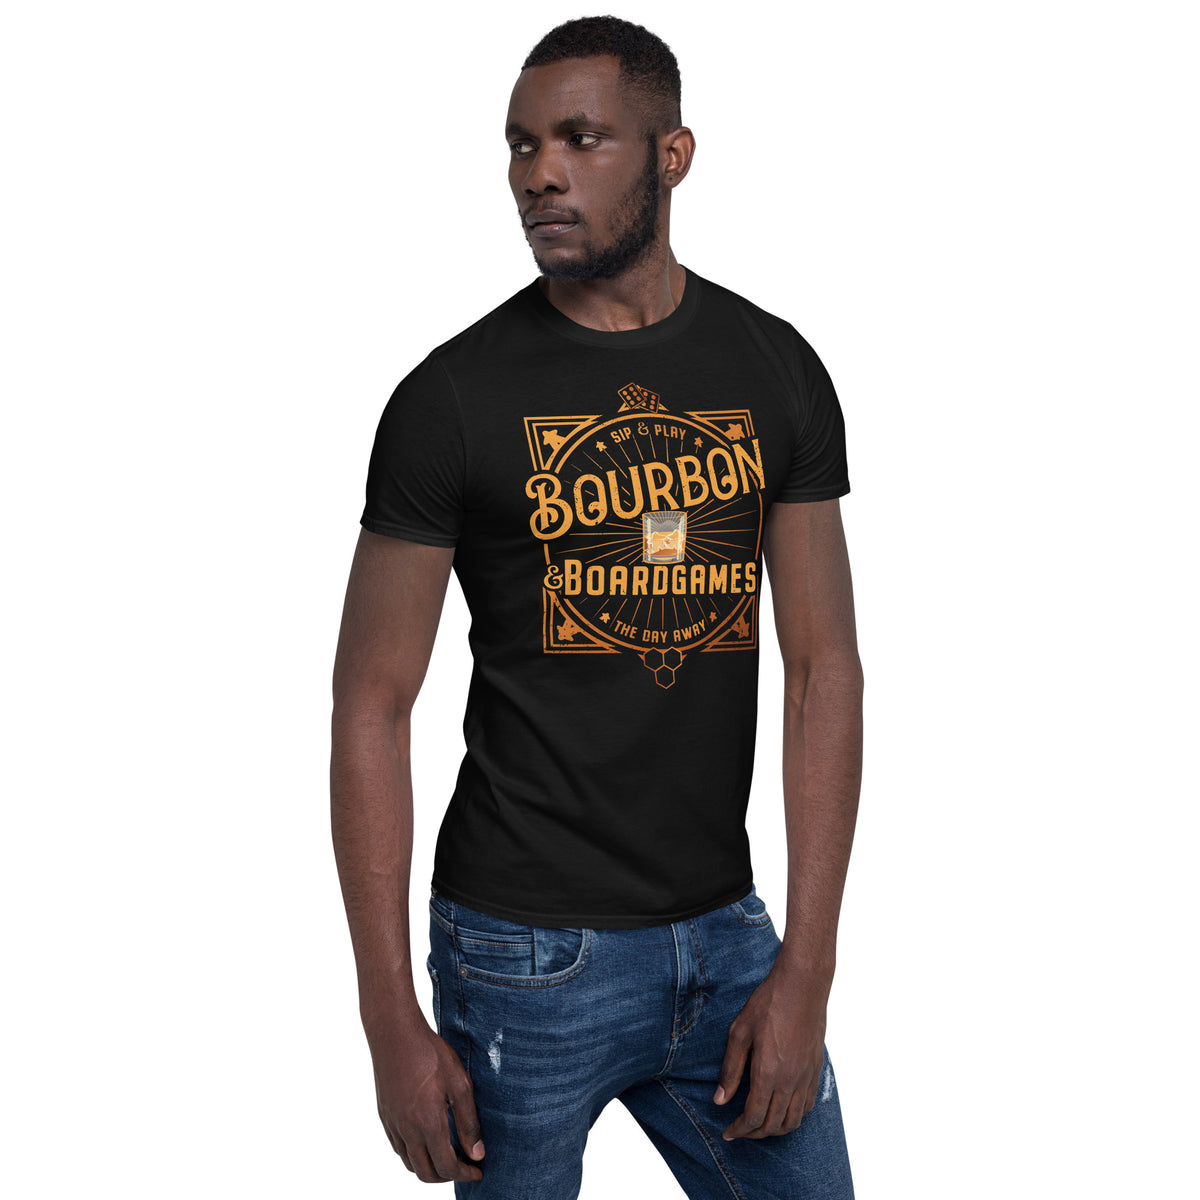 Model showing off our Bourbon and Boardgames design on black t-shirt 